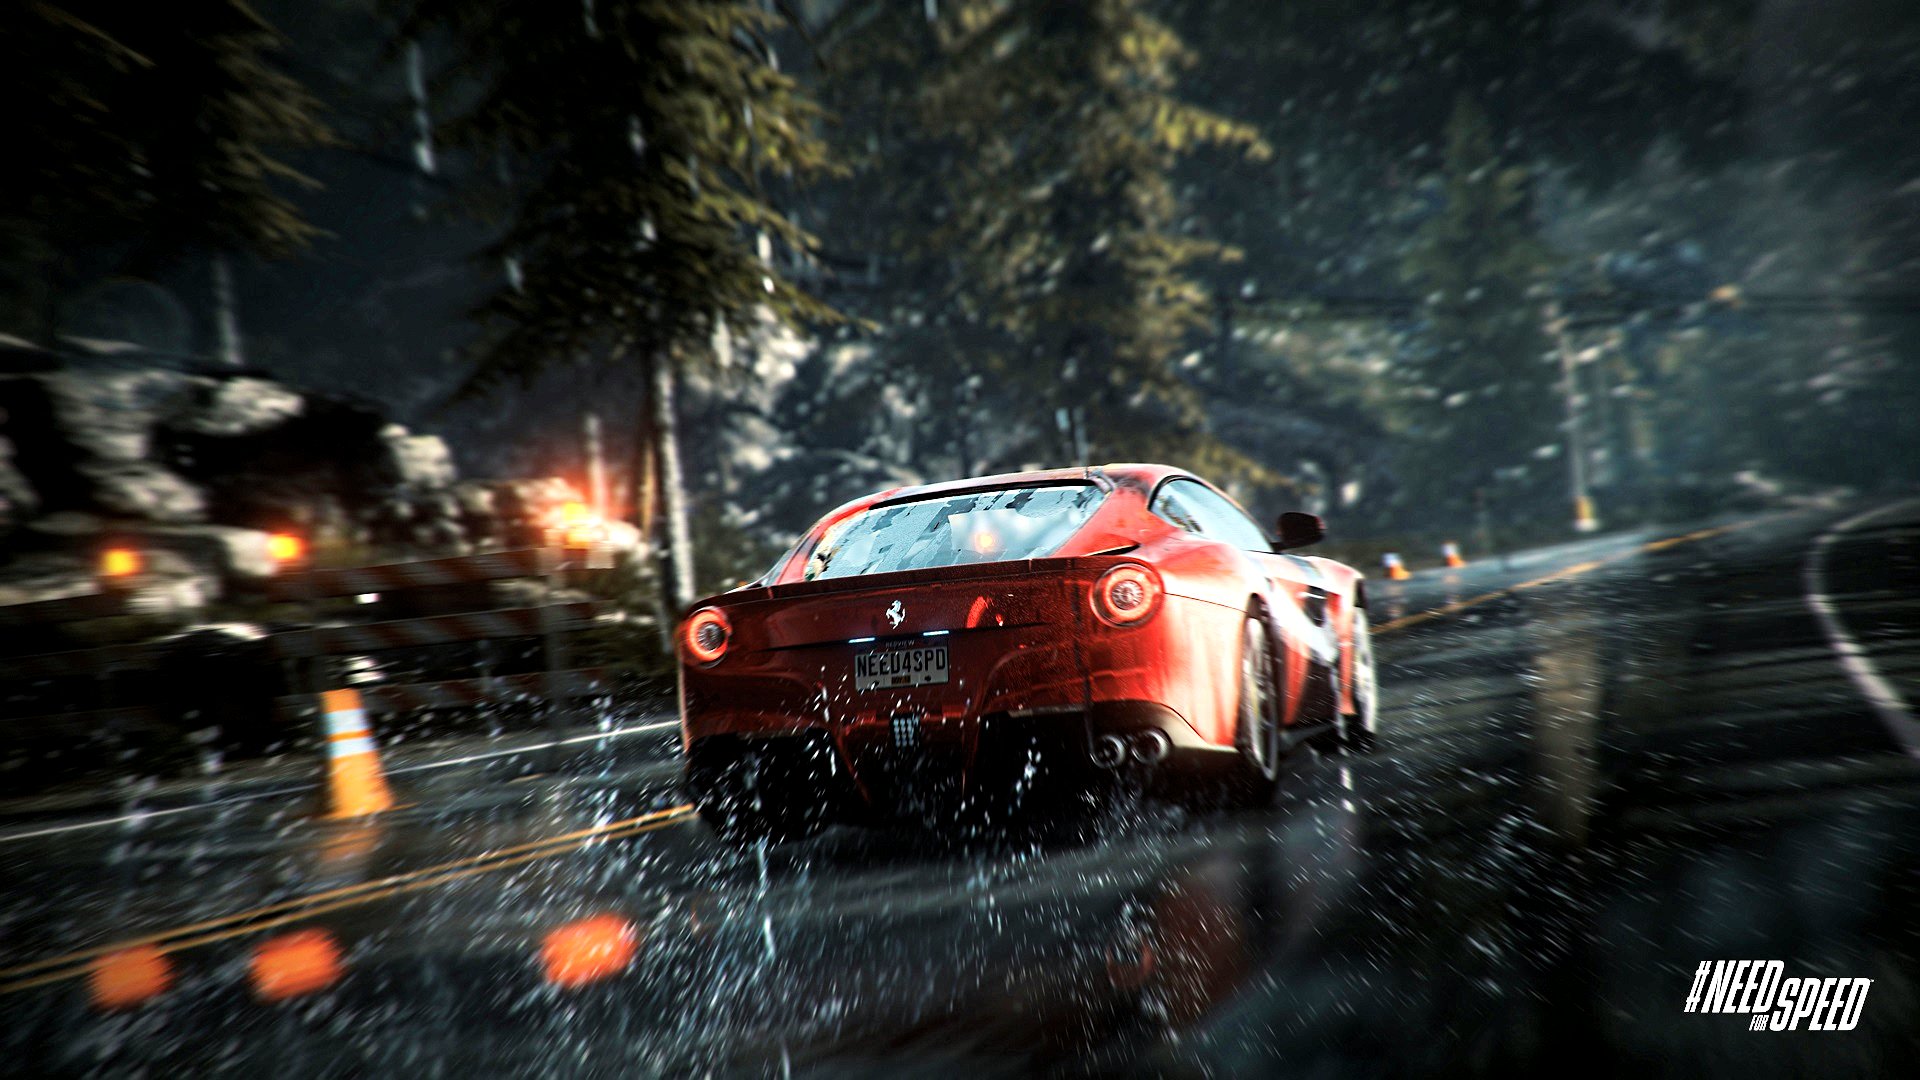 Fantastic Need For Speed Wallpaper Px